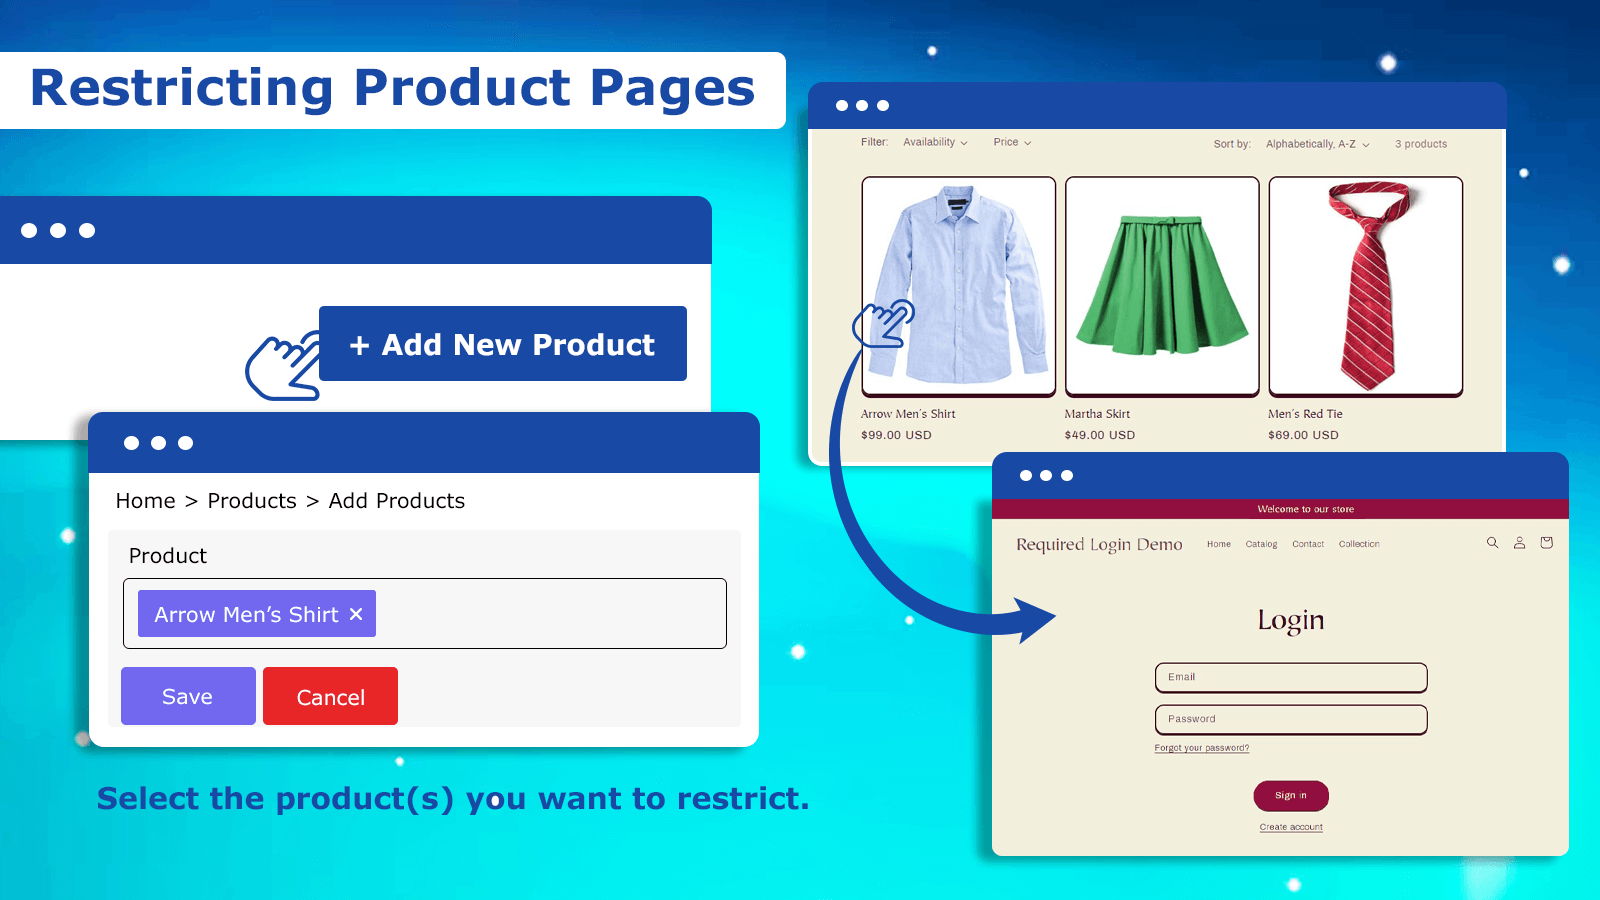 Restricting product pages